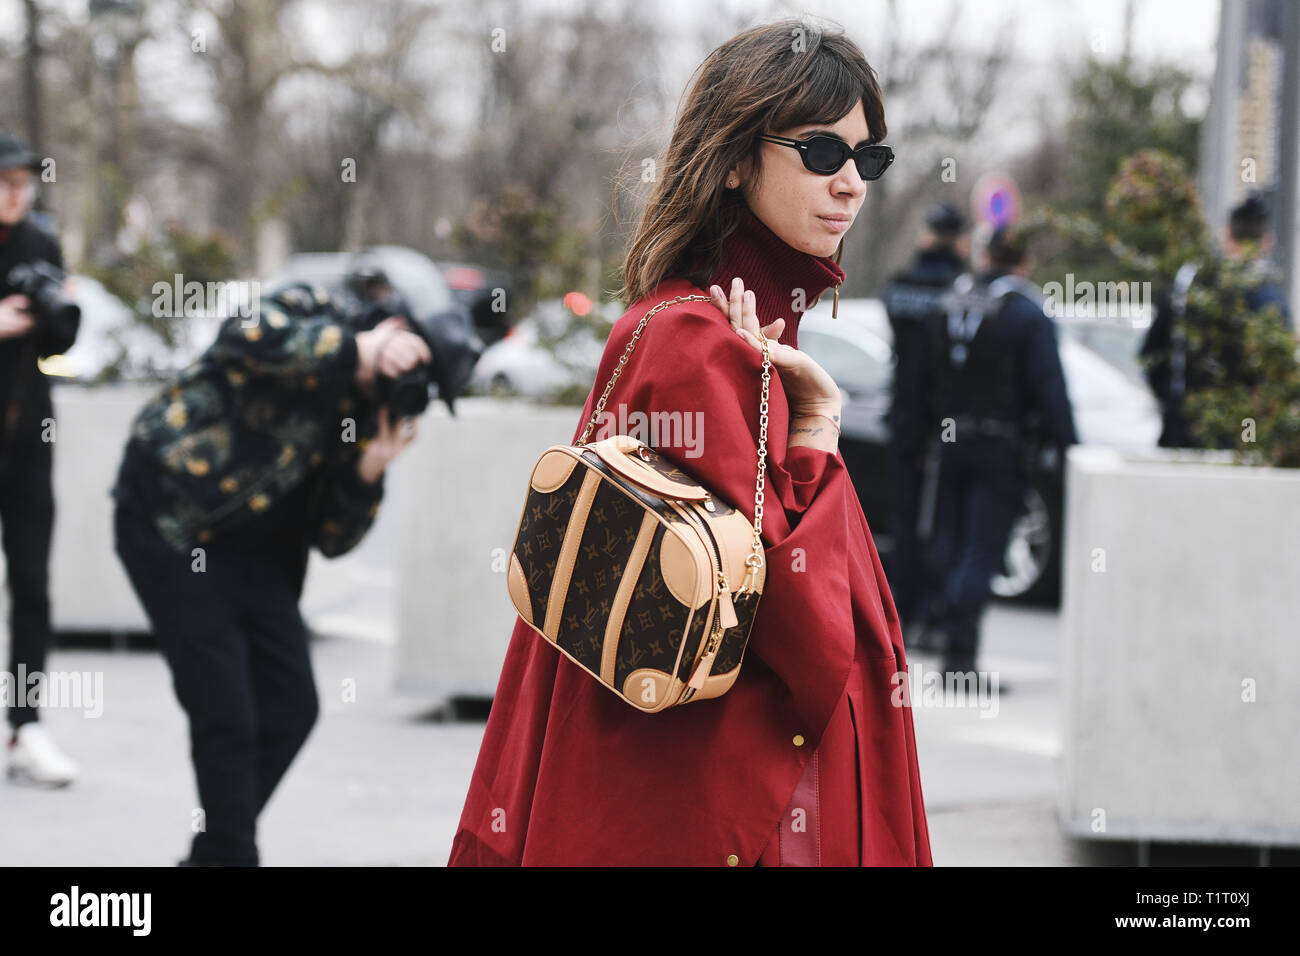 Paris, France - February 28, 2019: Street style outfit after a fashion show during Paris Fashion Week - PFWFW19 Stock Photo